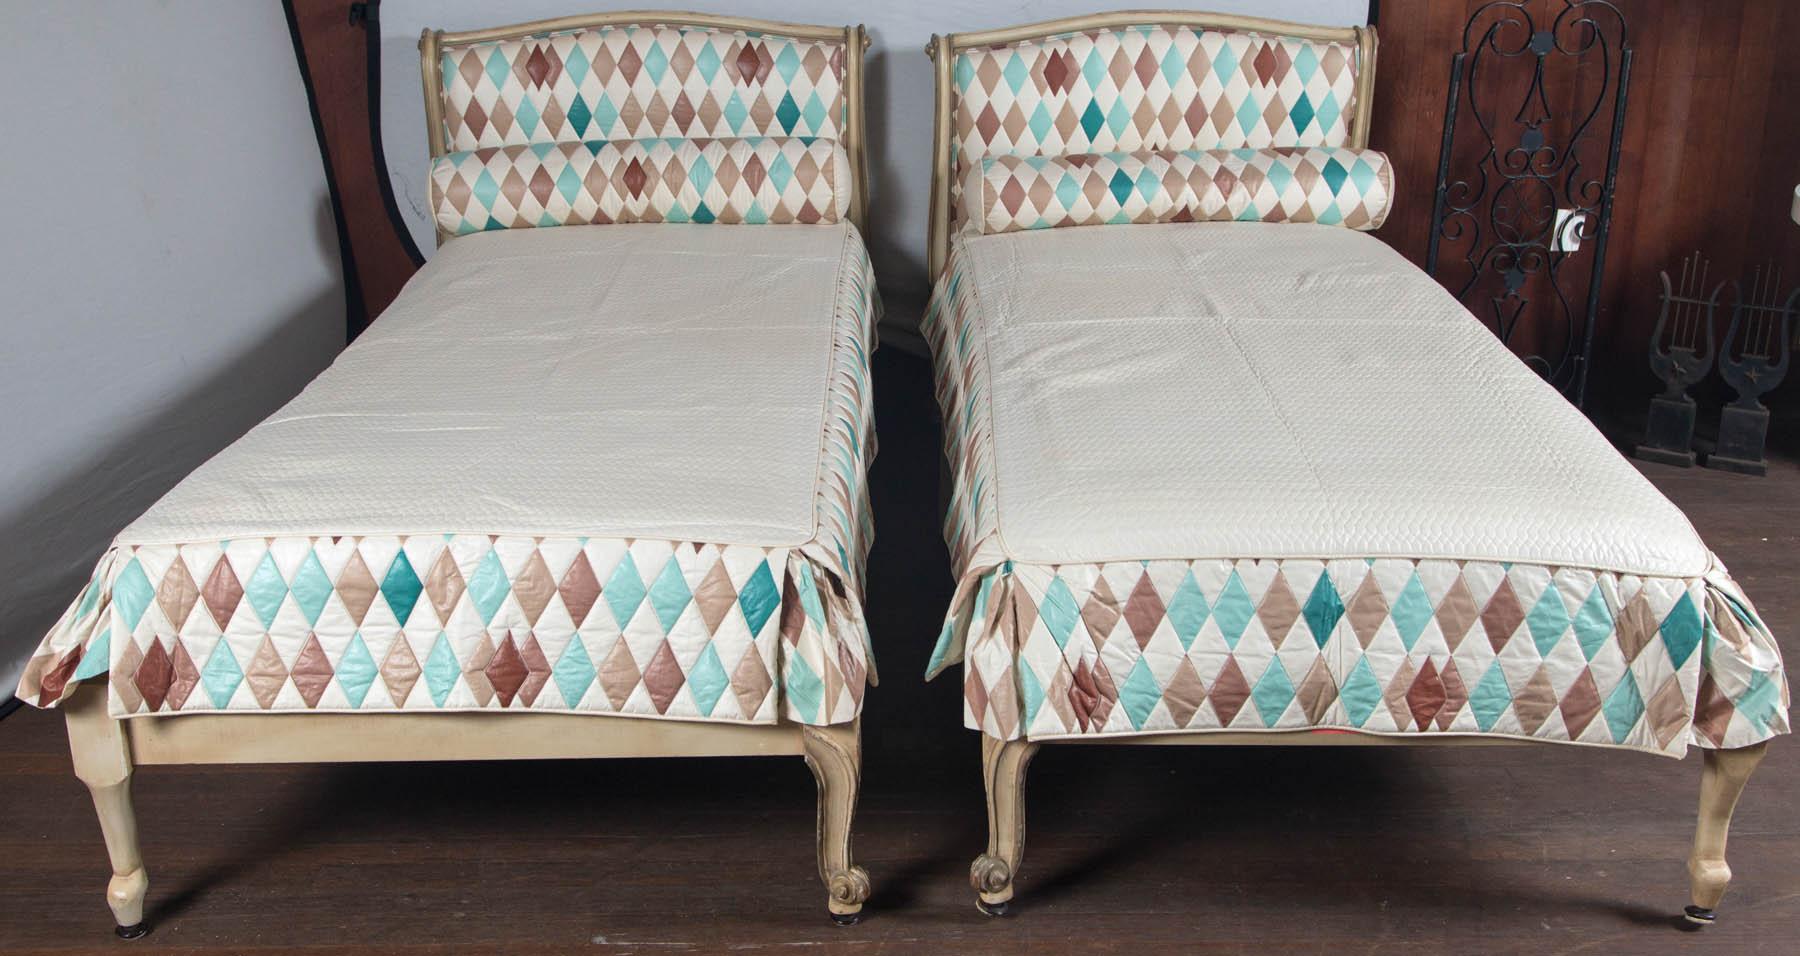 Pair of French Louis XV style twin beds with harlequin fabric upholstered headboards, neck rolls, and bedspreads. Fabric is taupe, aqua, and teal.
Bed frames are two toned off white. Bed height is 21 inches.